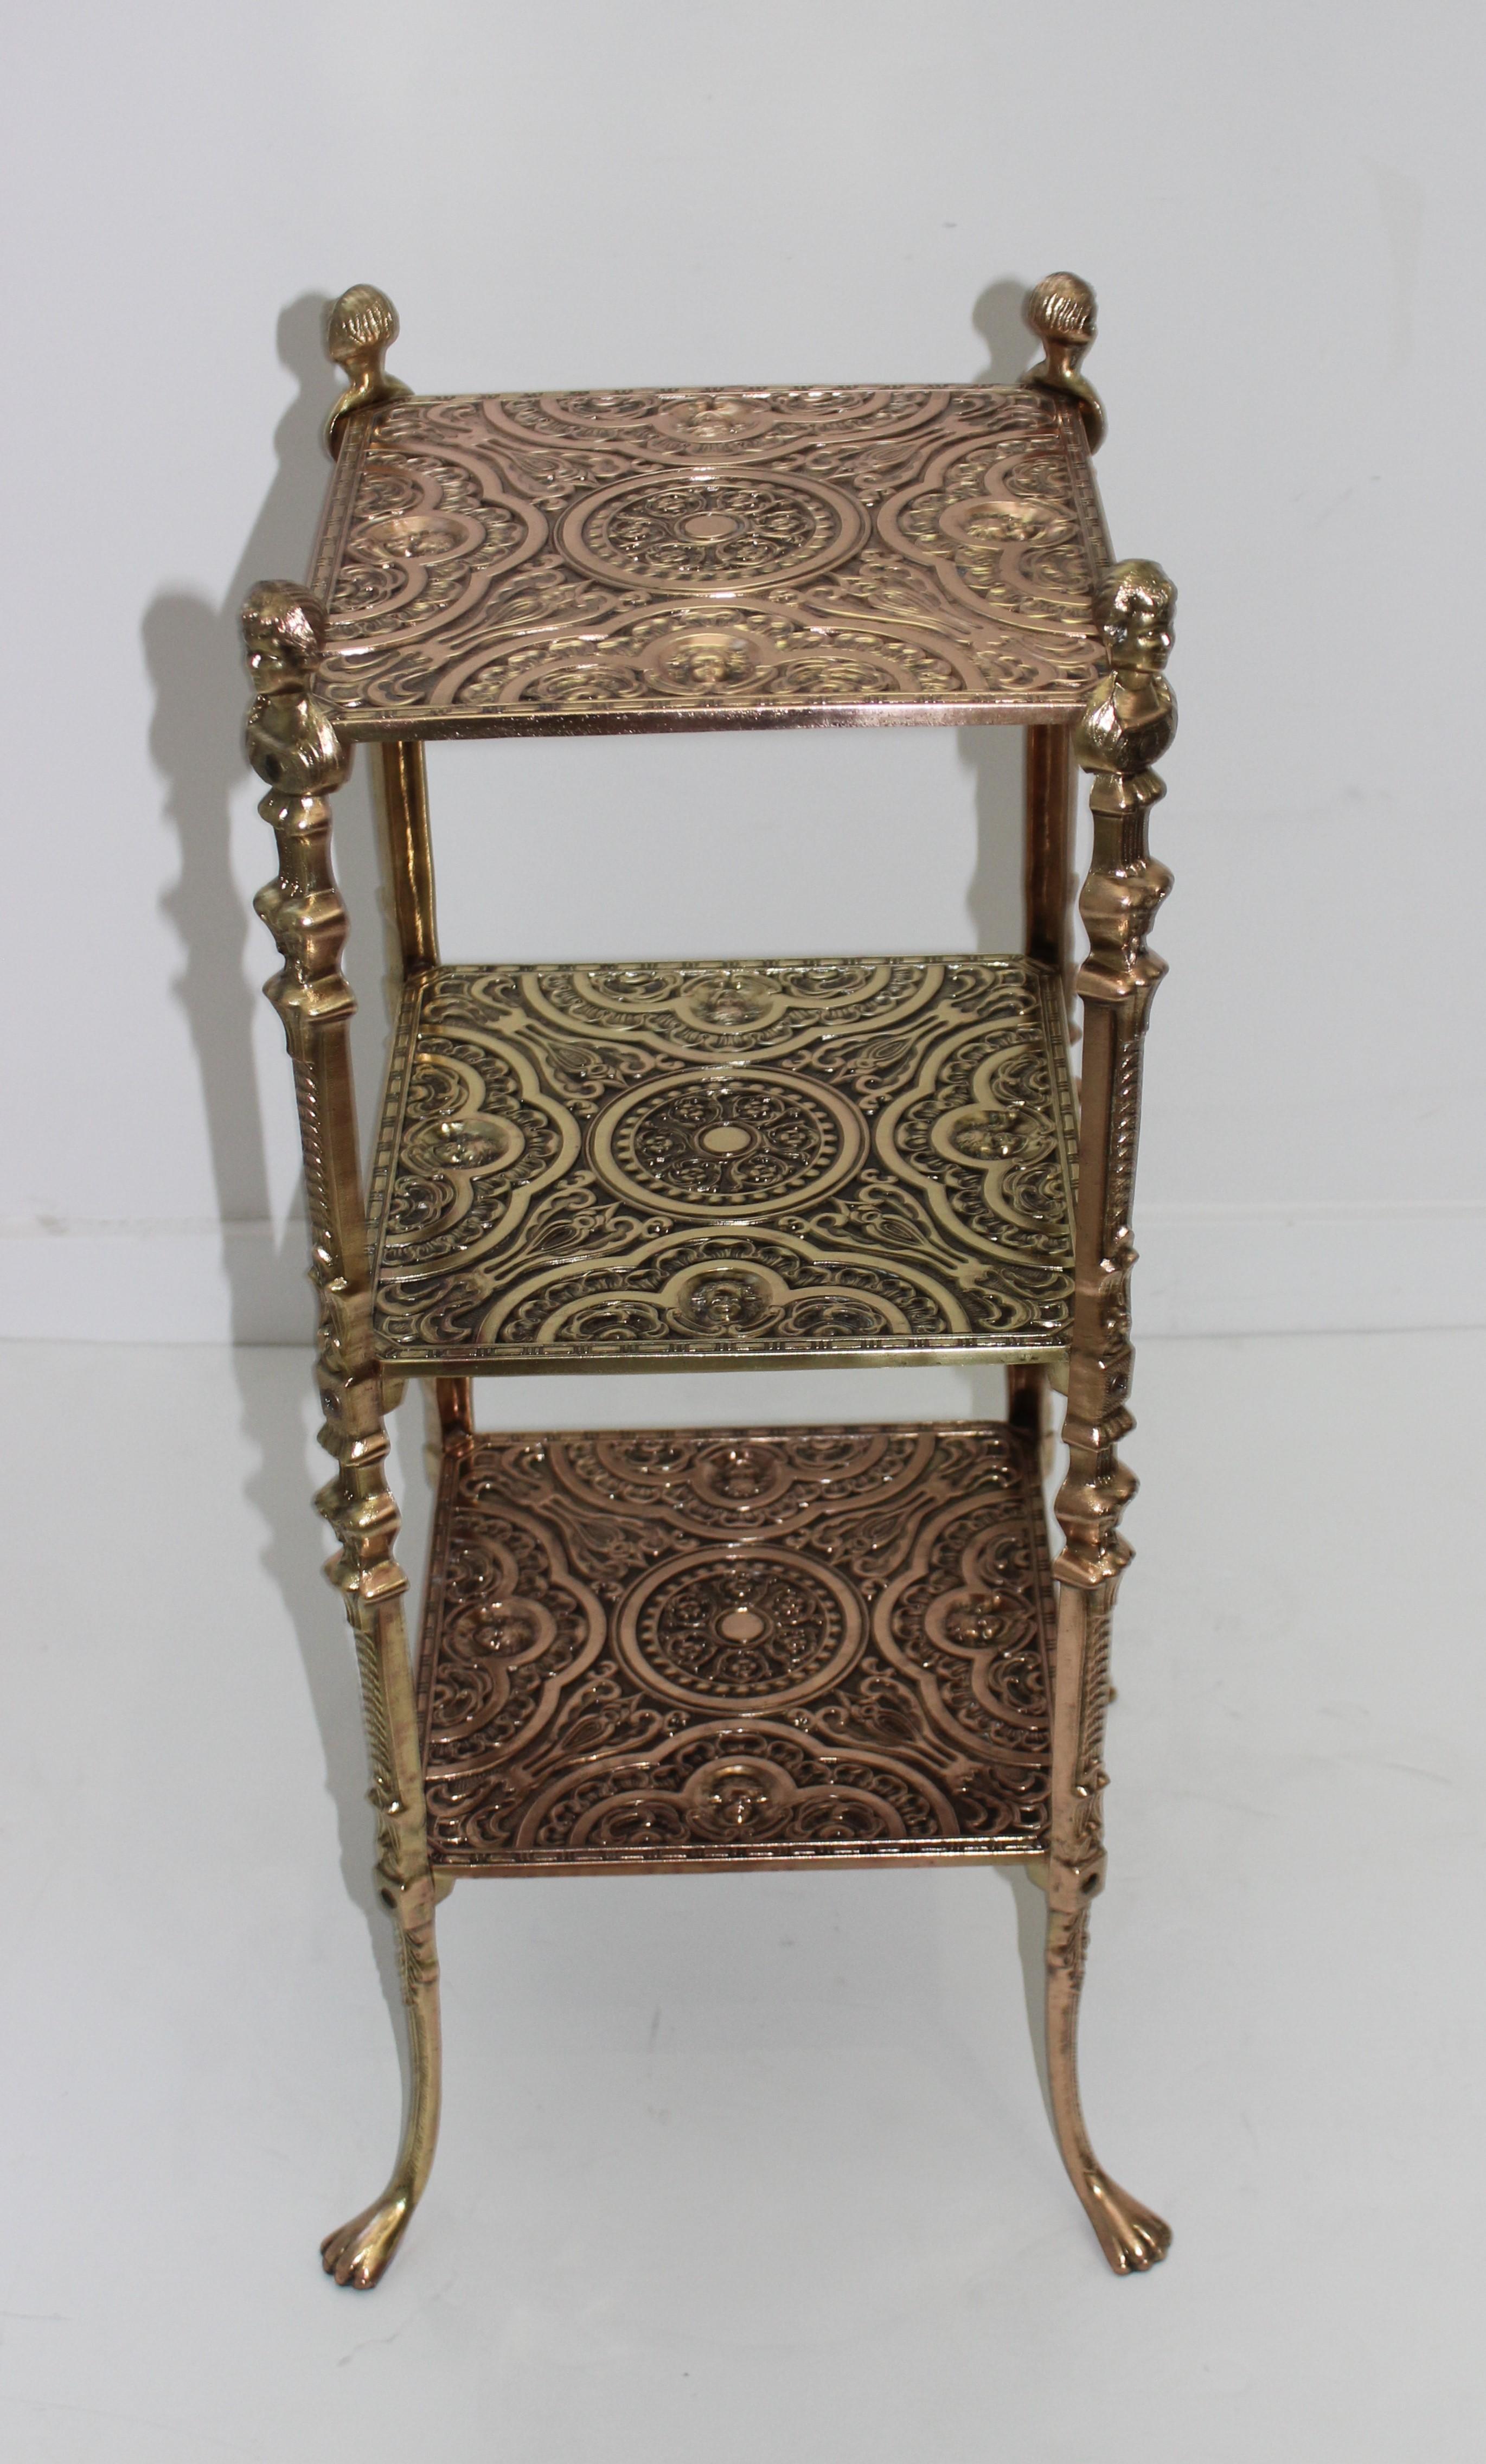 3 tiered side table